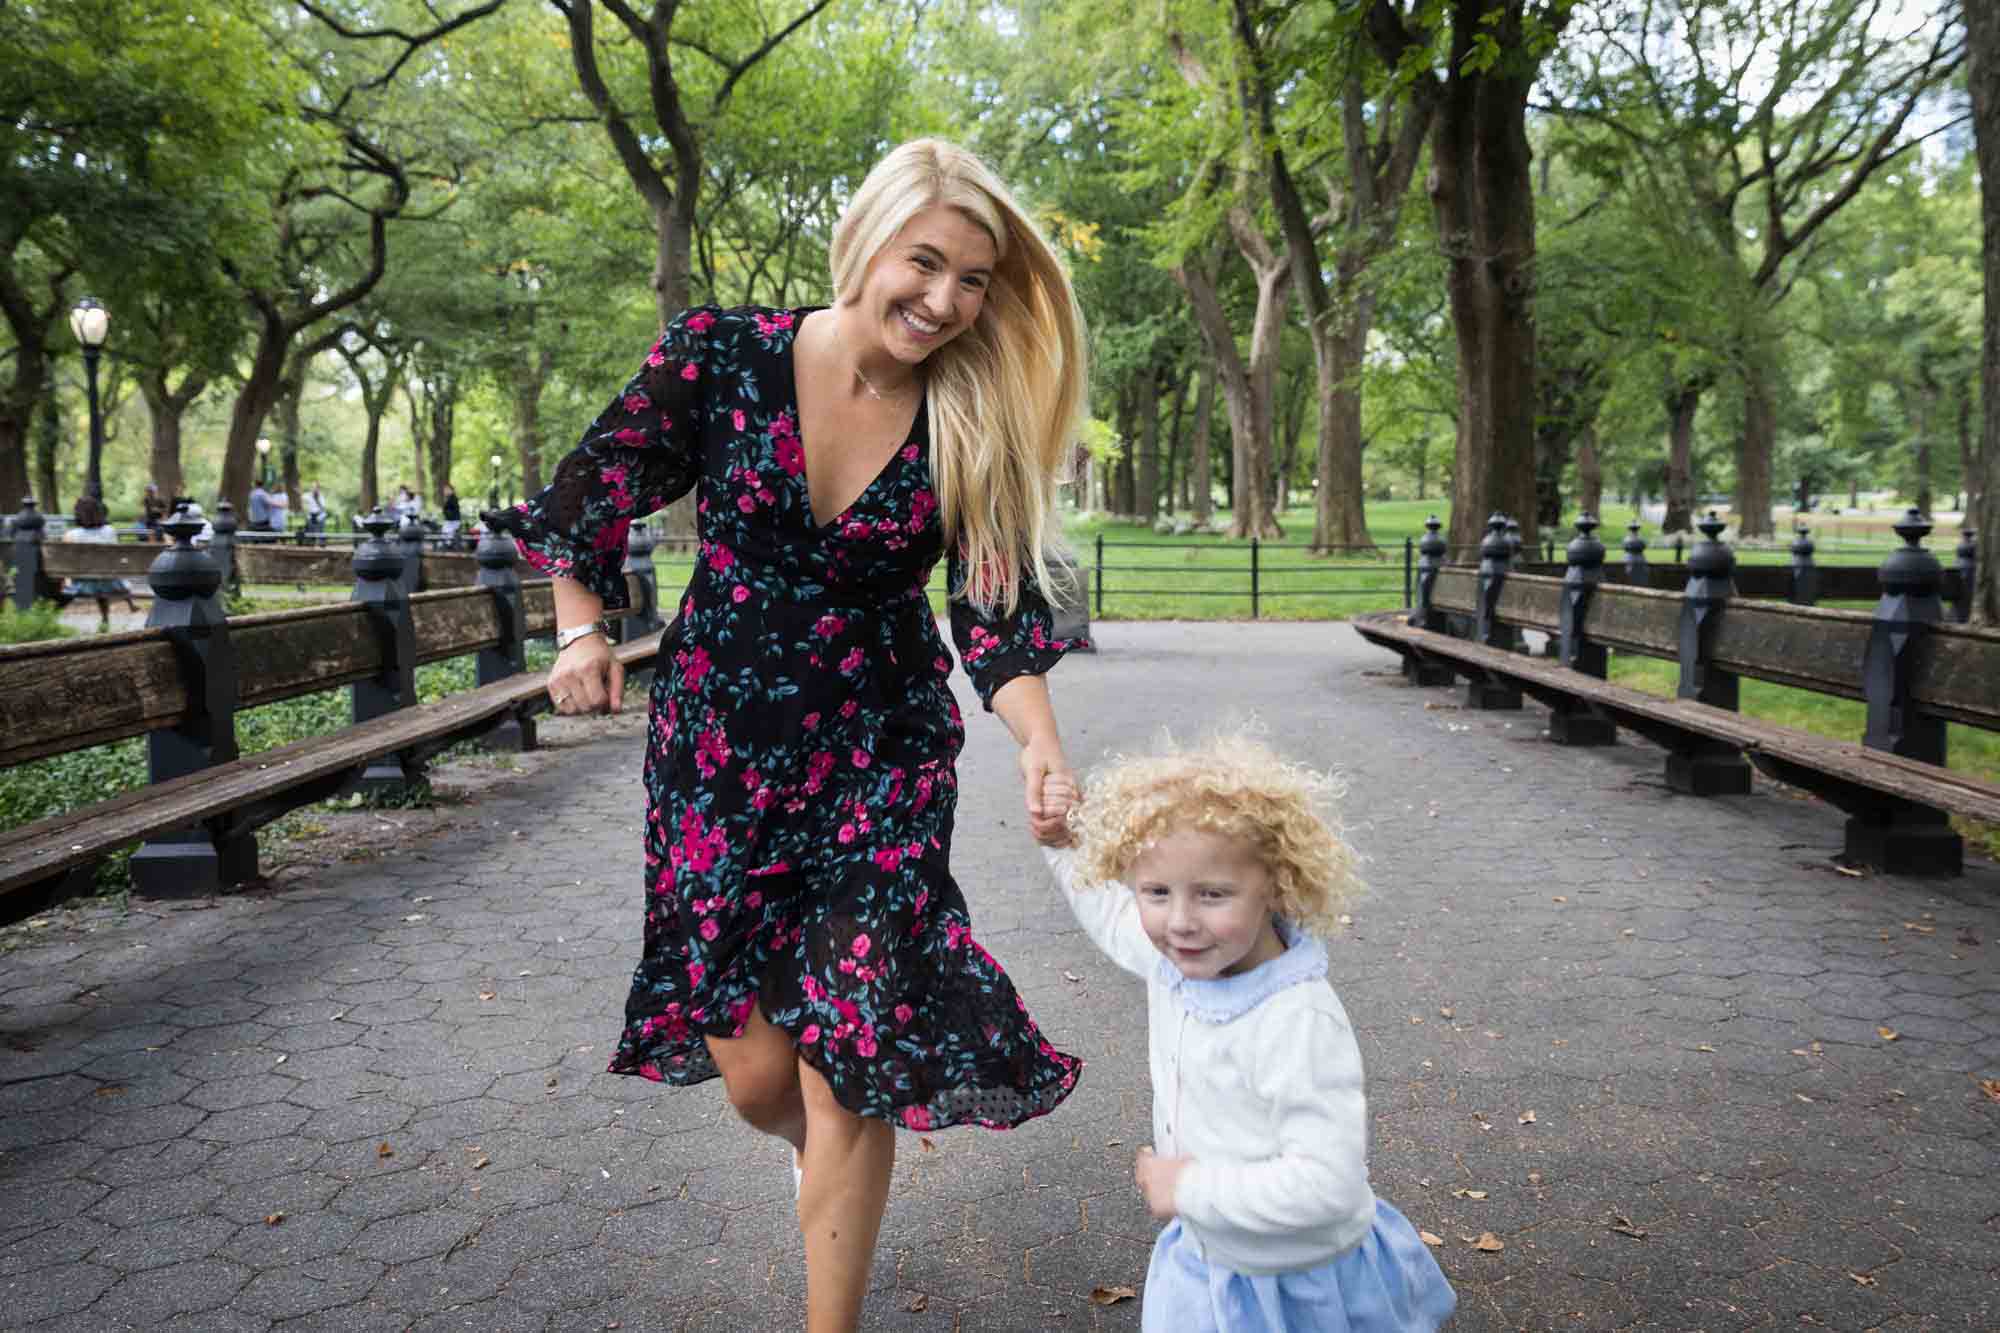 Mother and child running in Central Park for an article on NYC family portrait tips for tourists